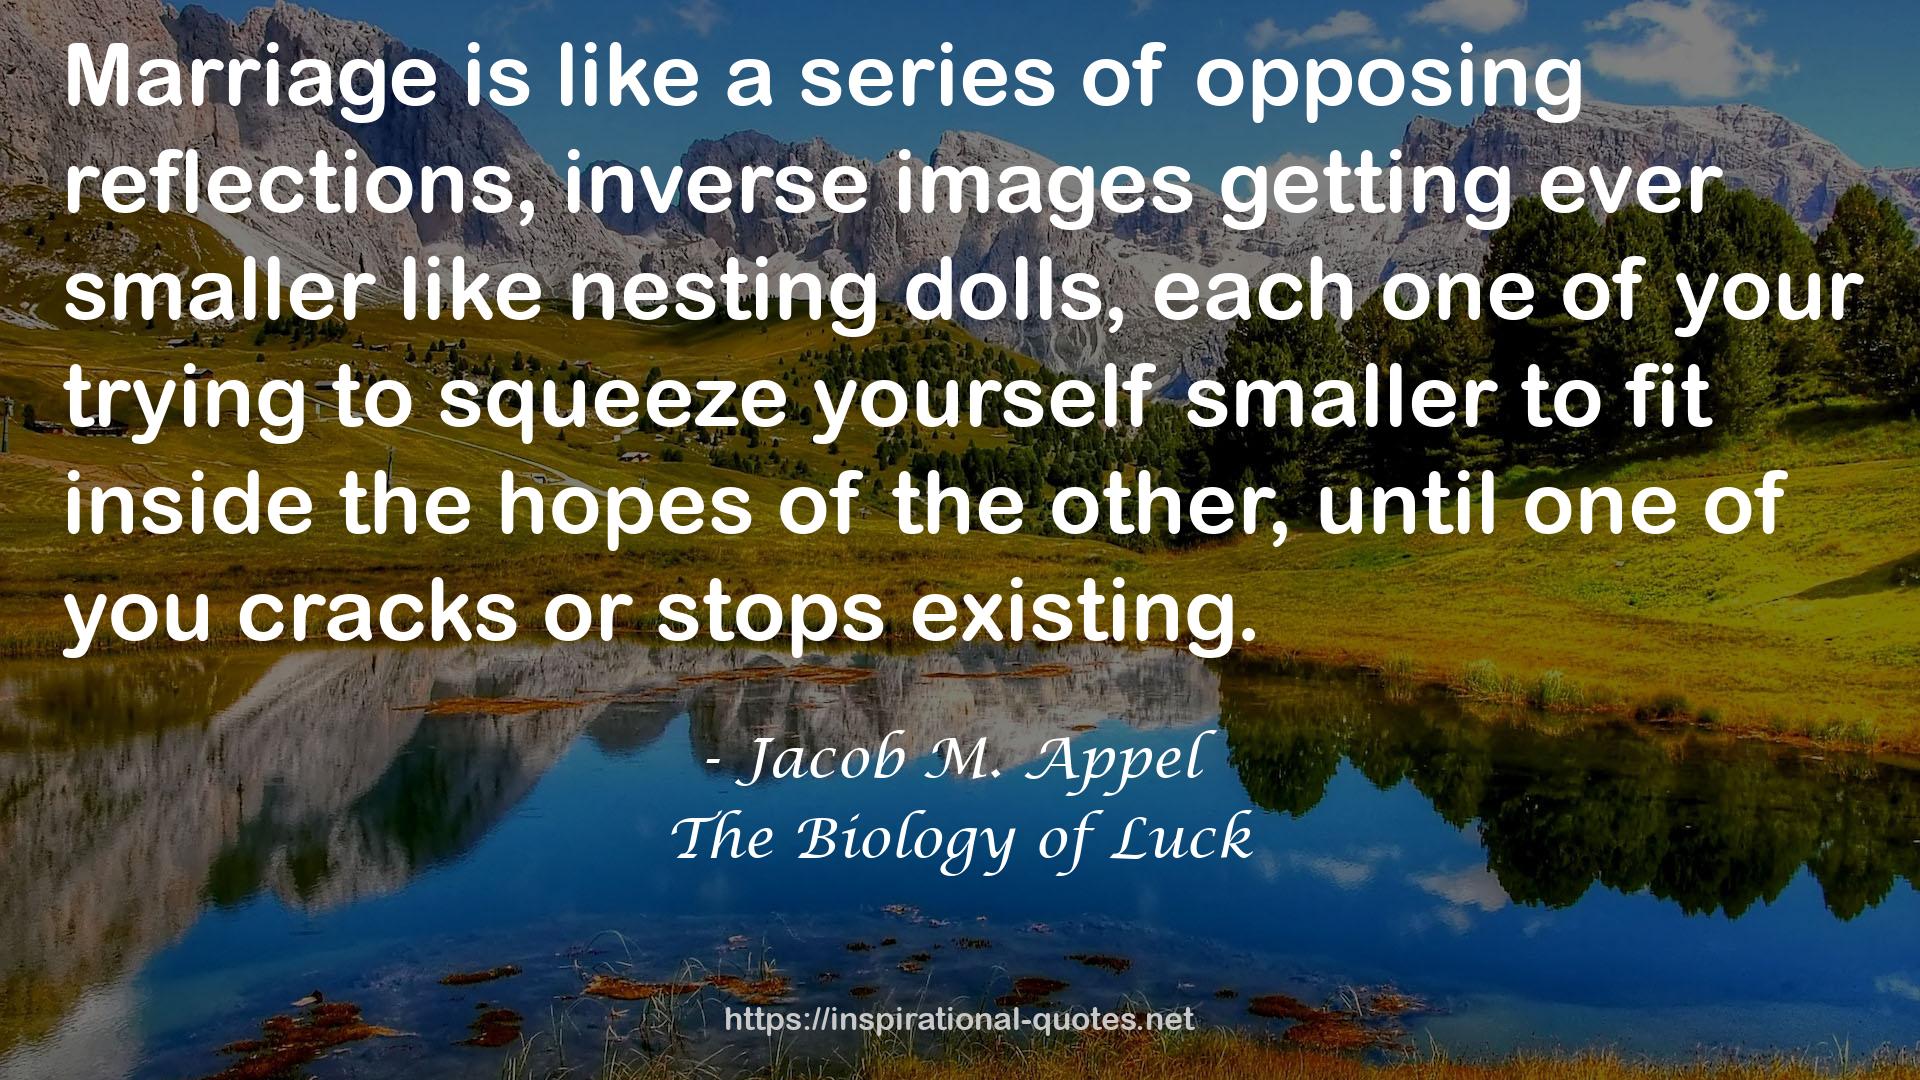 The Biology of Luck QUOTES